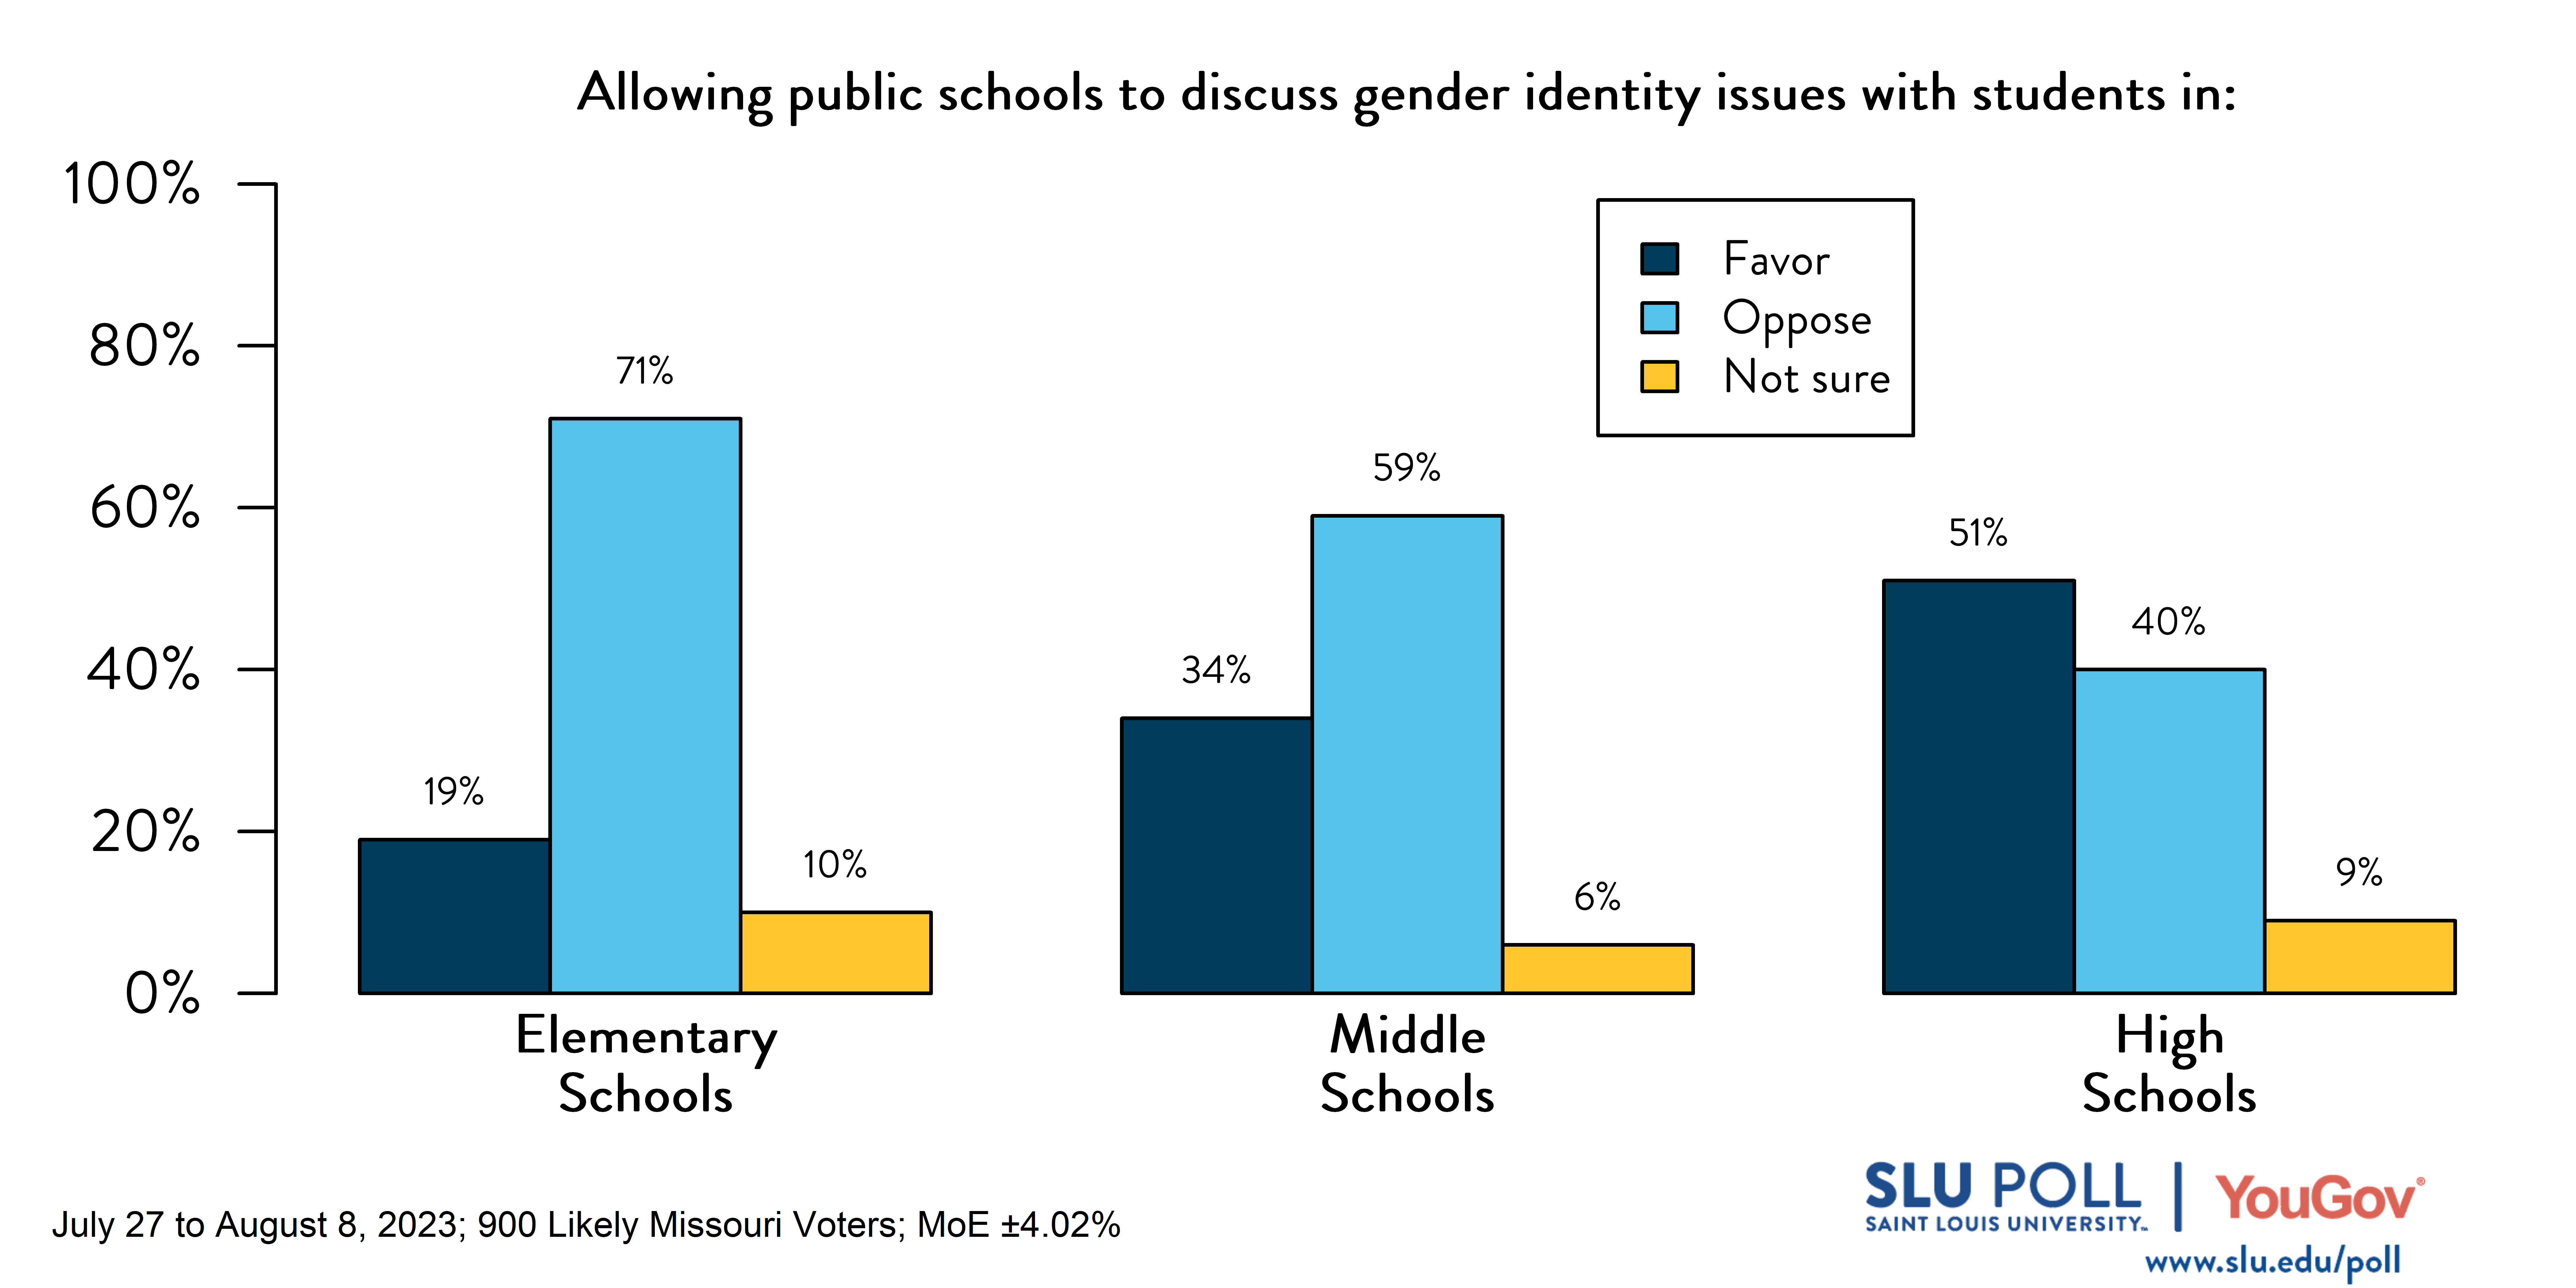 Likely voters' responses to 'Do you favor or oppose public schools being allowed to: discuss gender identity issues with students in elementary schools?': 19% Favor, 71% Oppose, and 10% Not Sure. Likely voters' responses to 'Do you favor or oppose public schools being allowed to: discuss gender identity issues with students in middle schools?': 34% Favor, 59% Oppose, and 6% Not Sure. Likely voters' responses to 'Do you favor or oppose public schools being allowed to: discuss gender identity issues with students in high schools?': 51% Favor, 40% Oppose, and 9% Not Sure.